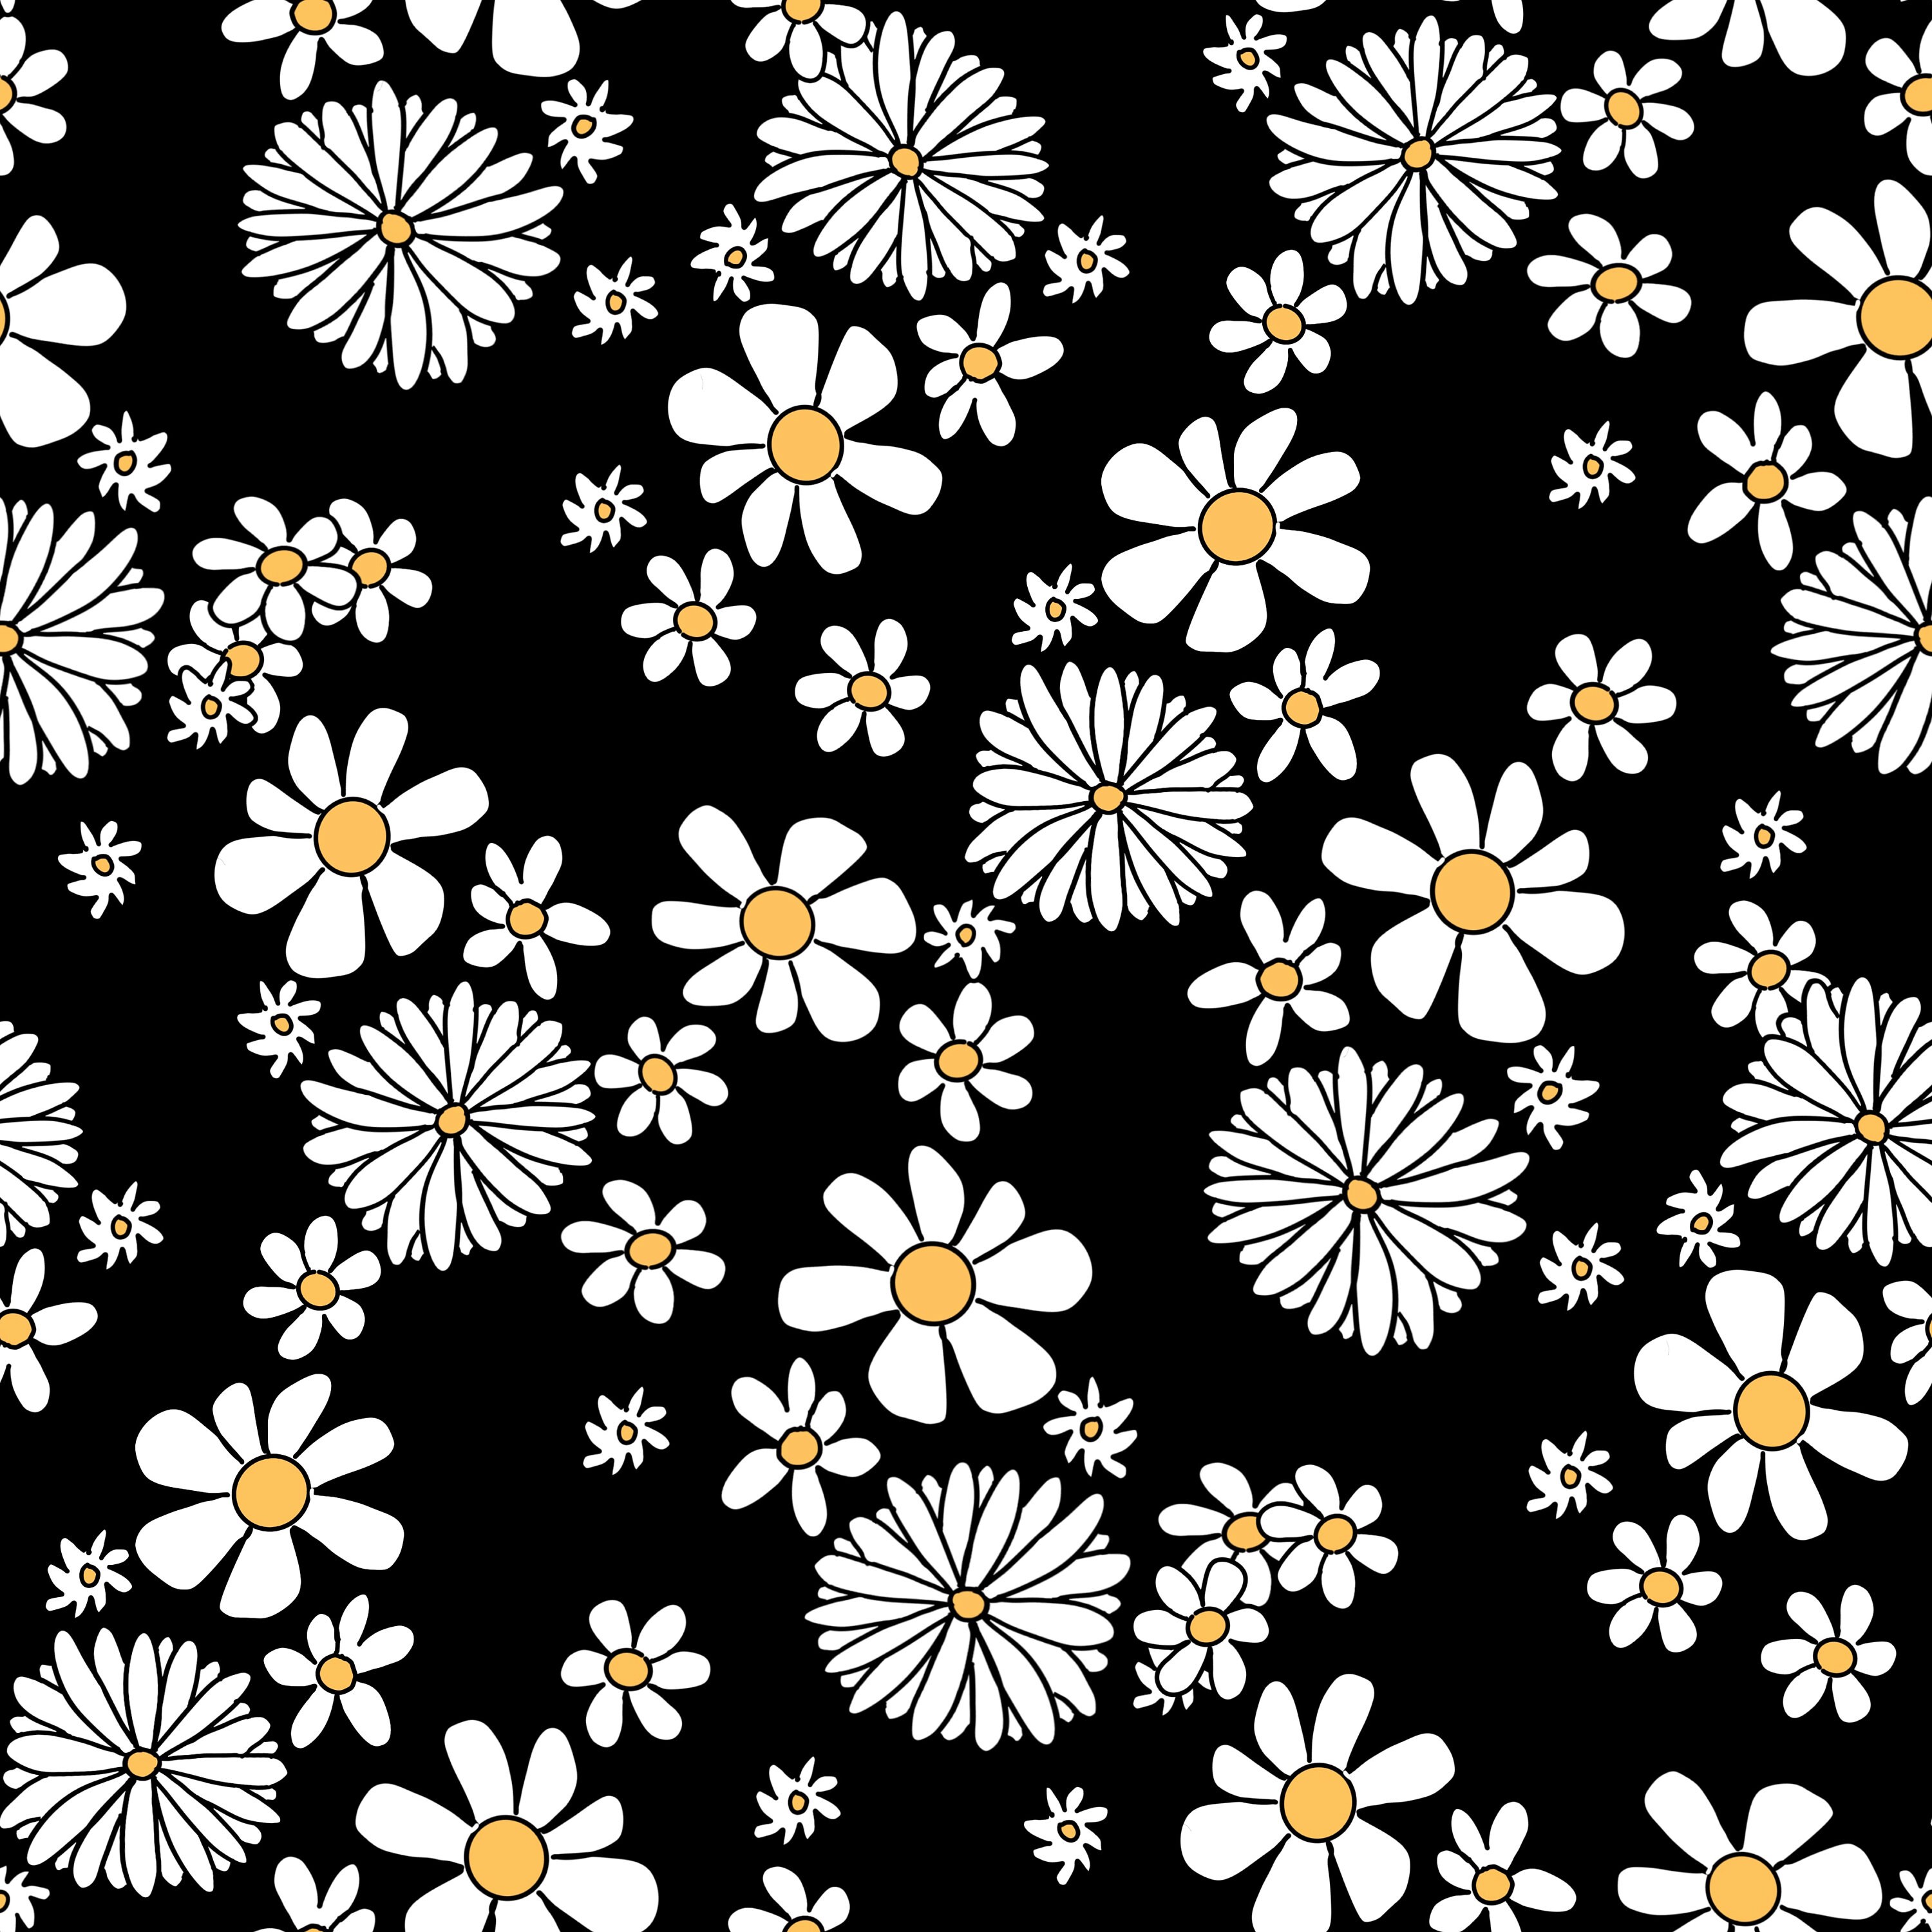 Daisy 90s florals seamless repeat pattern Commercial Use OK | Etsy